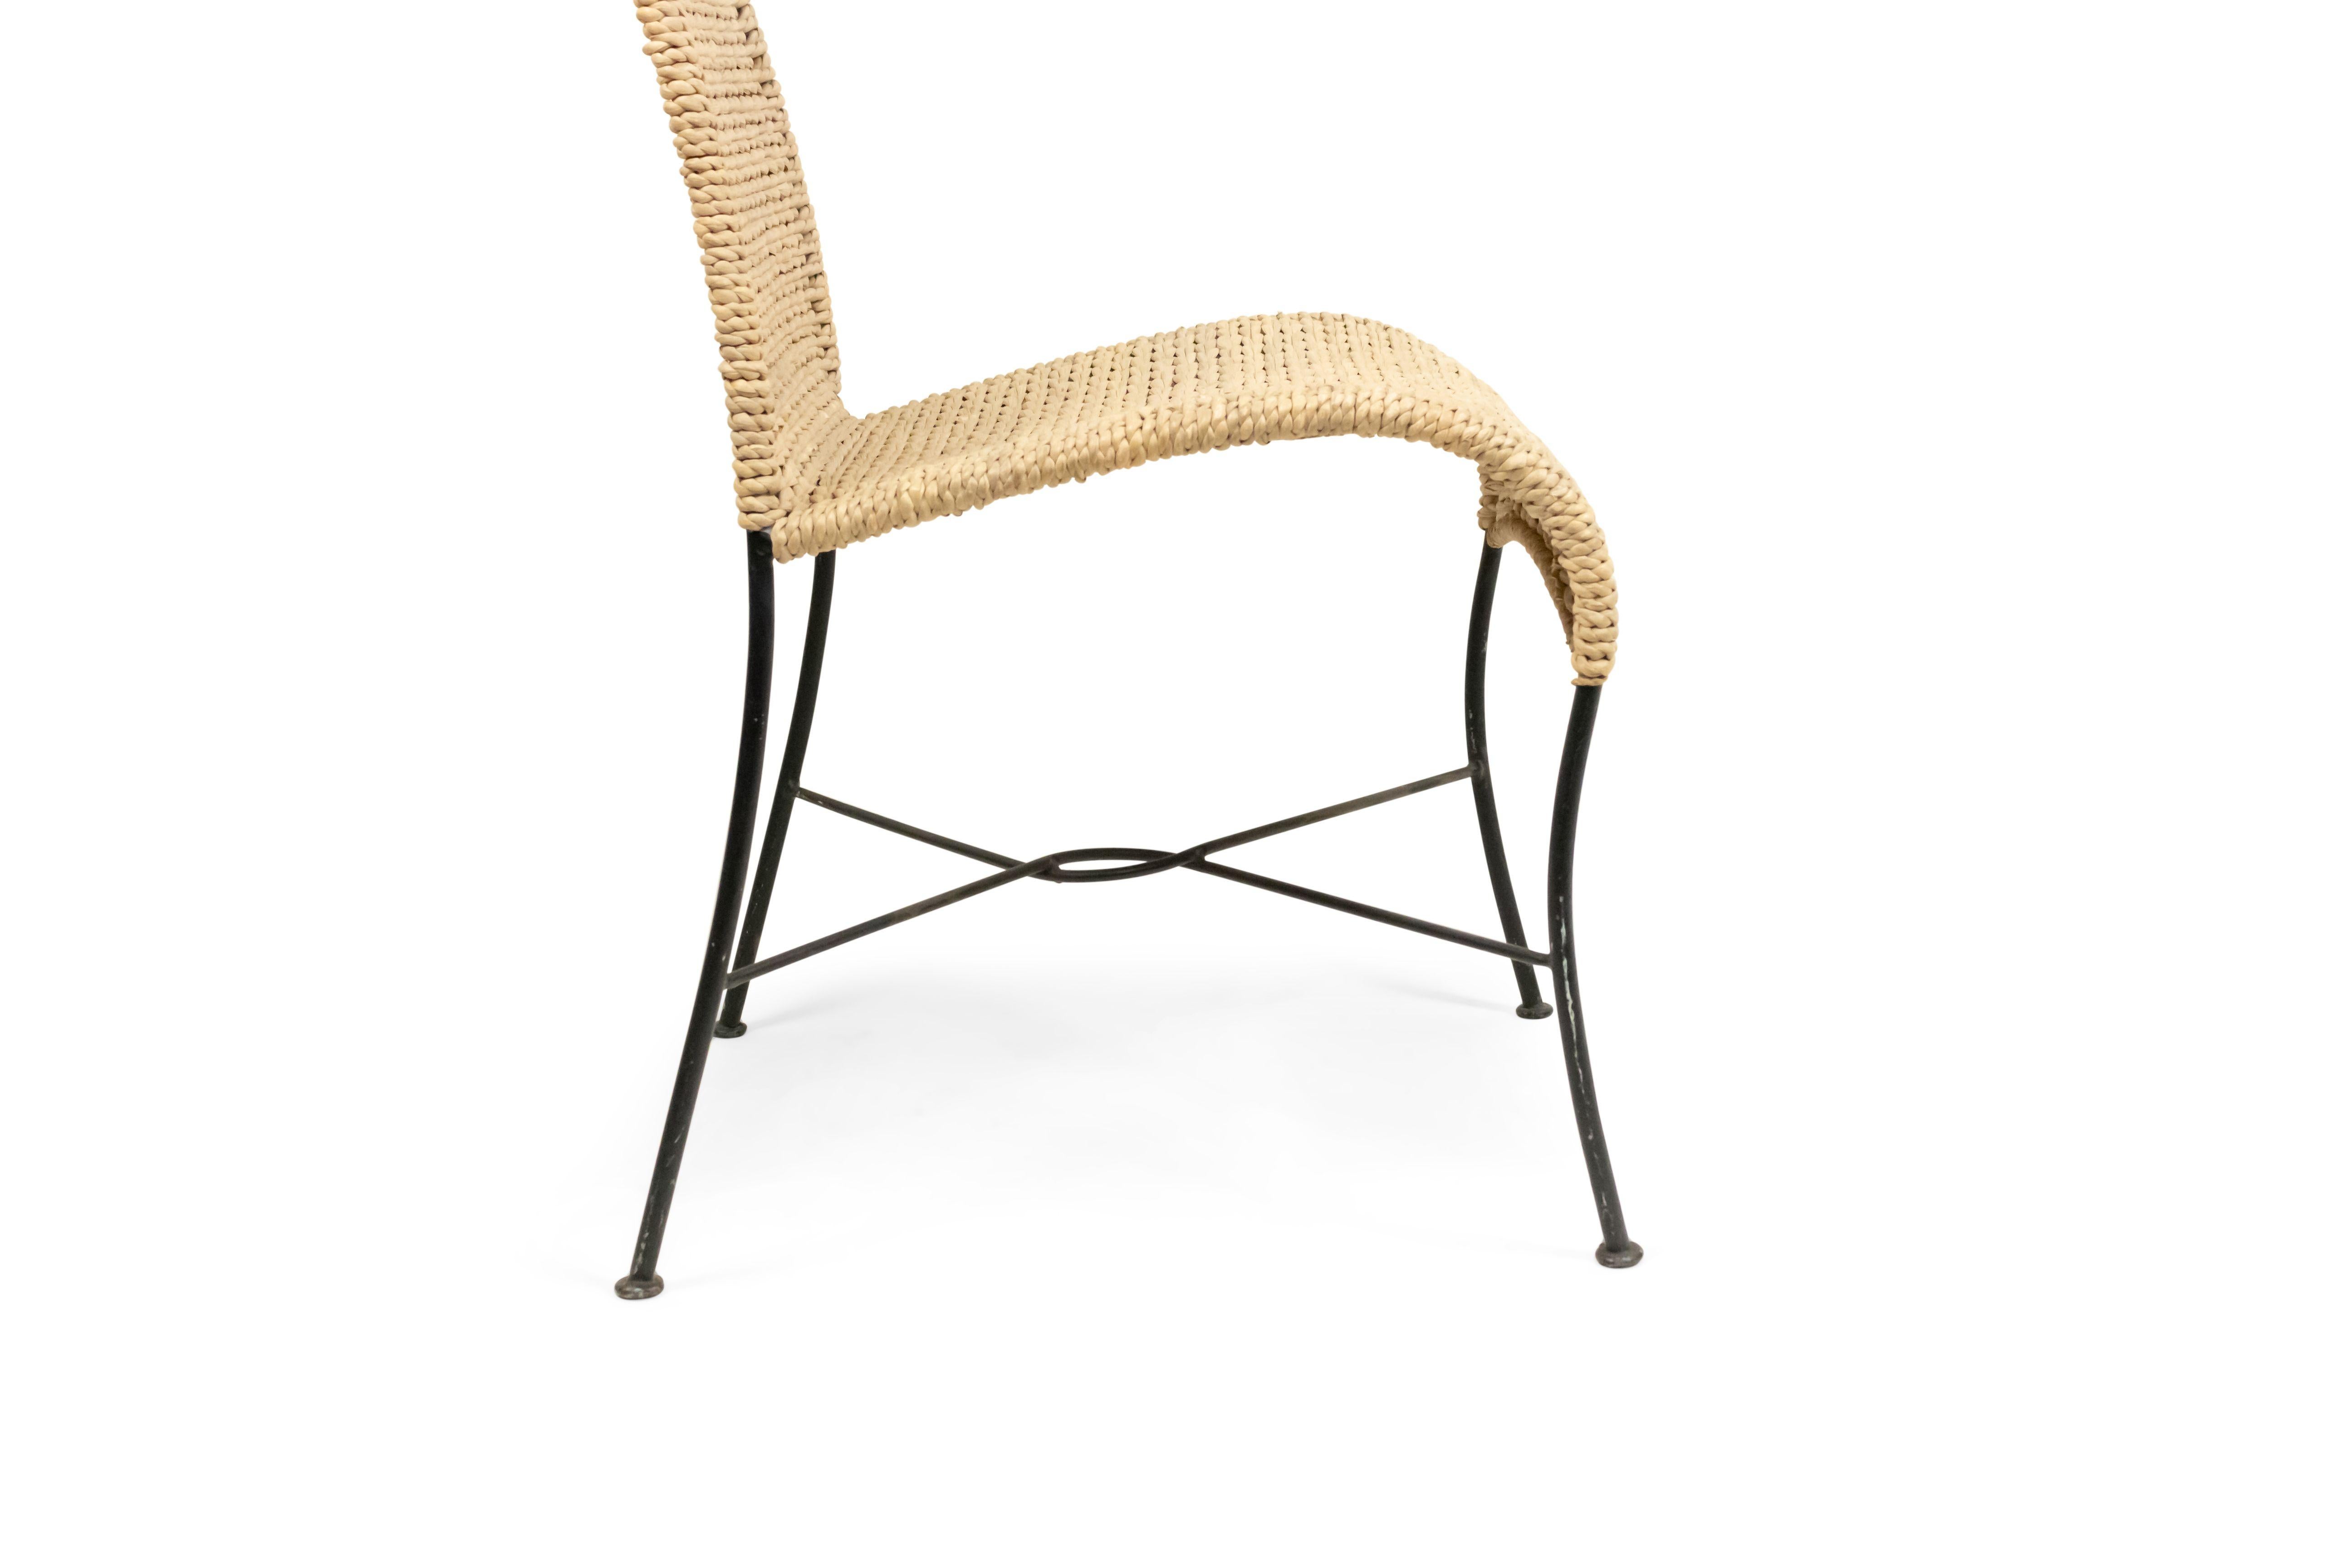 American Post-War Rattan Side Chair For Sale 3